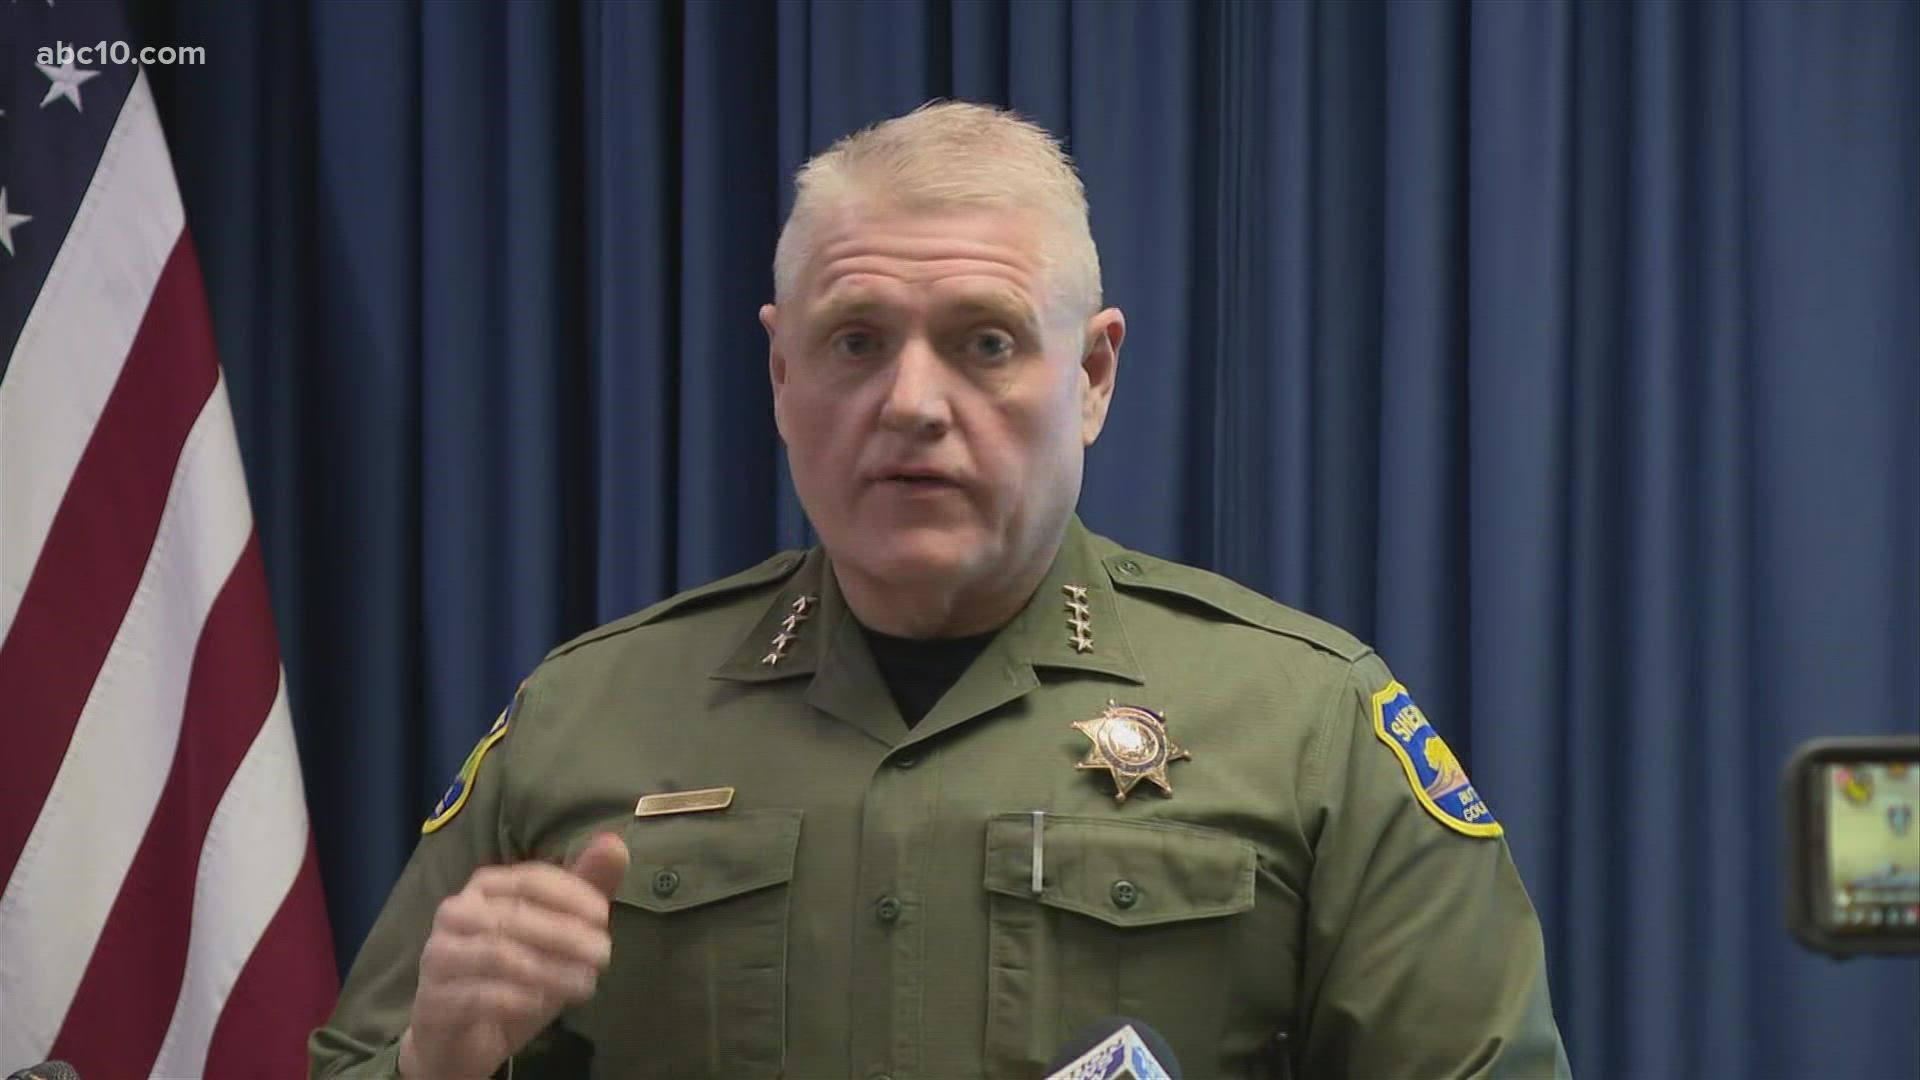 "Ultimately, this was a horrible tragedy," said sheriff Kory L. Honea at a news conference on Thursday morning regarding the Greyhound bus shooting.